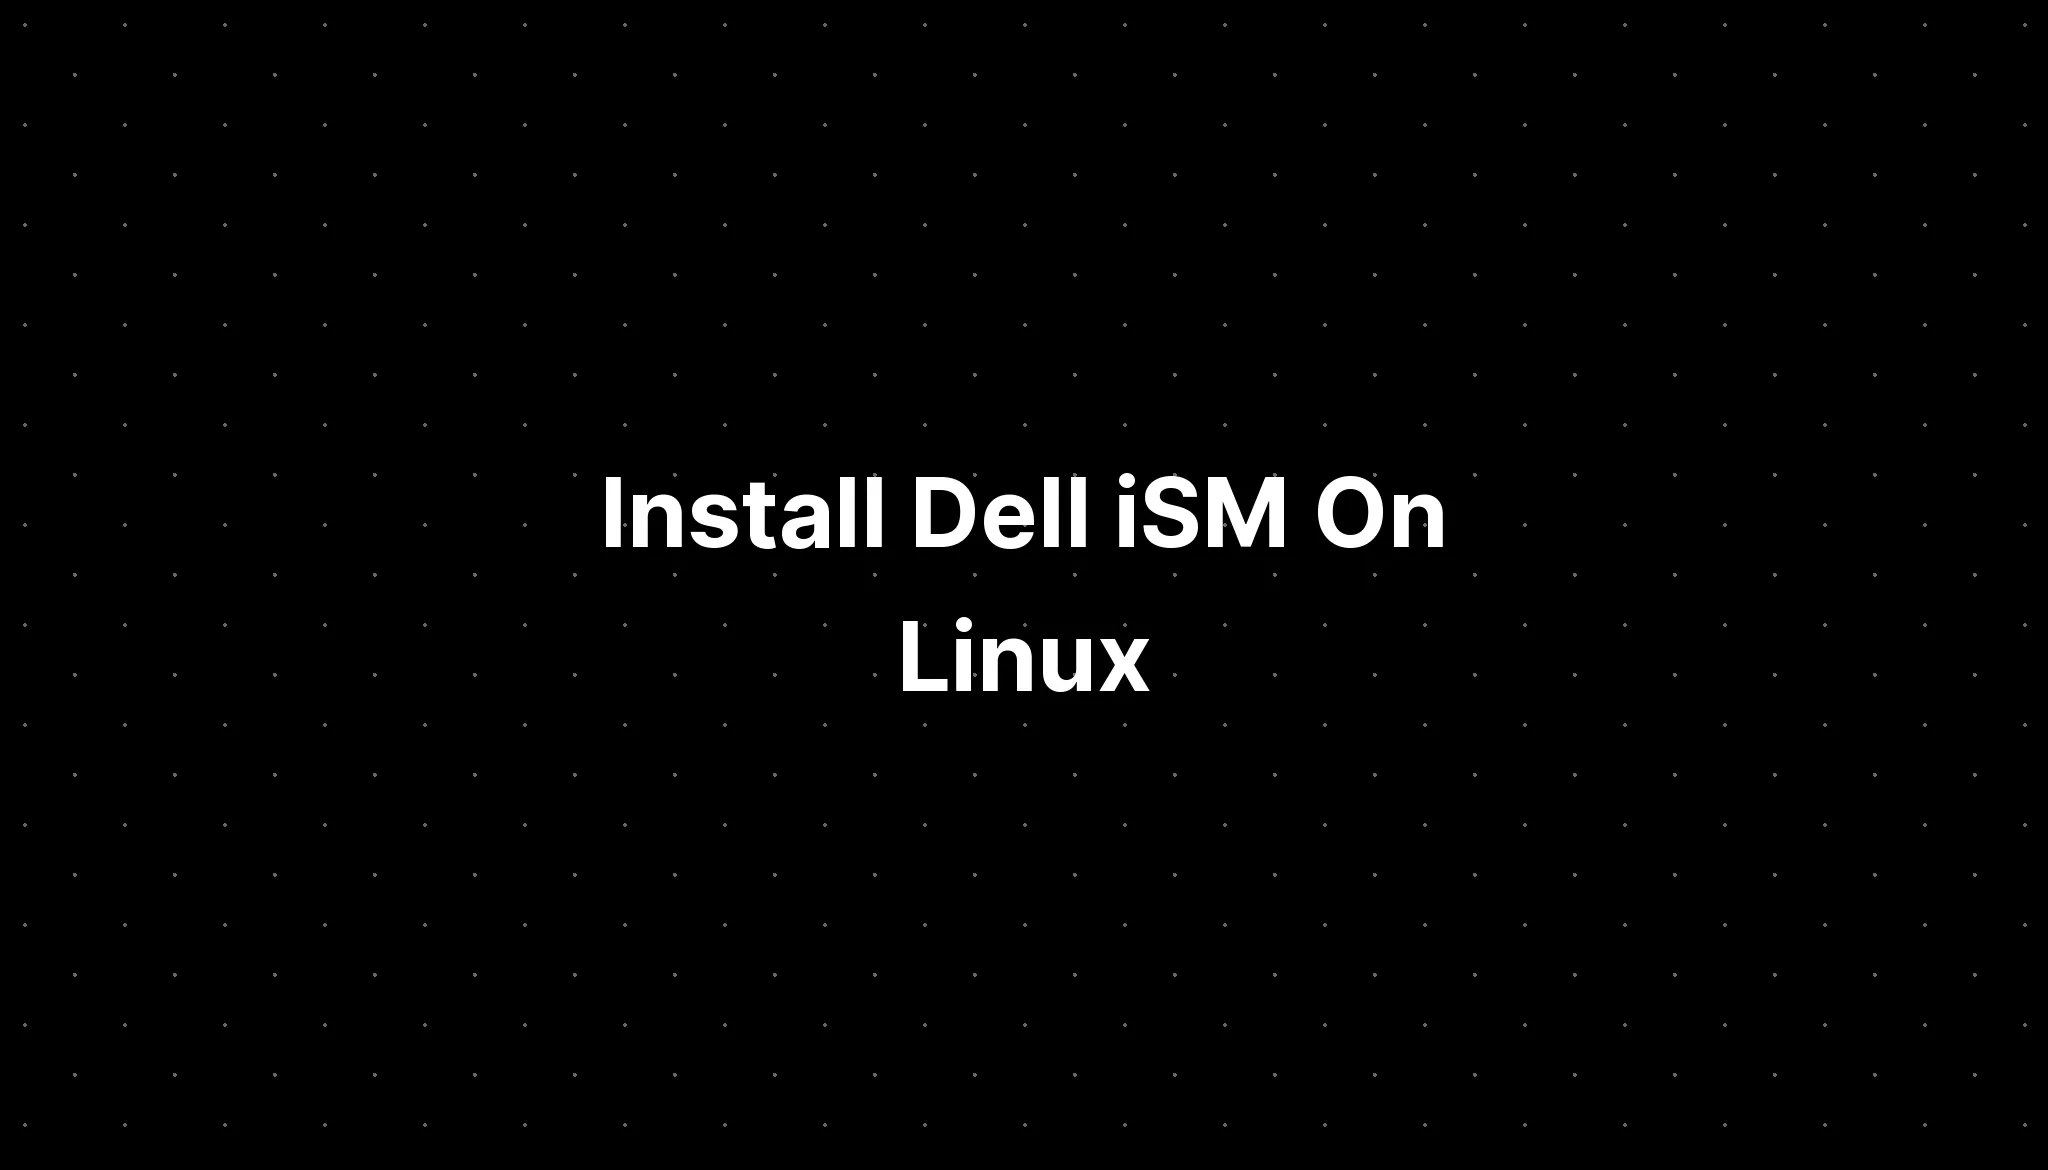 Install Dell iSM On Linux